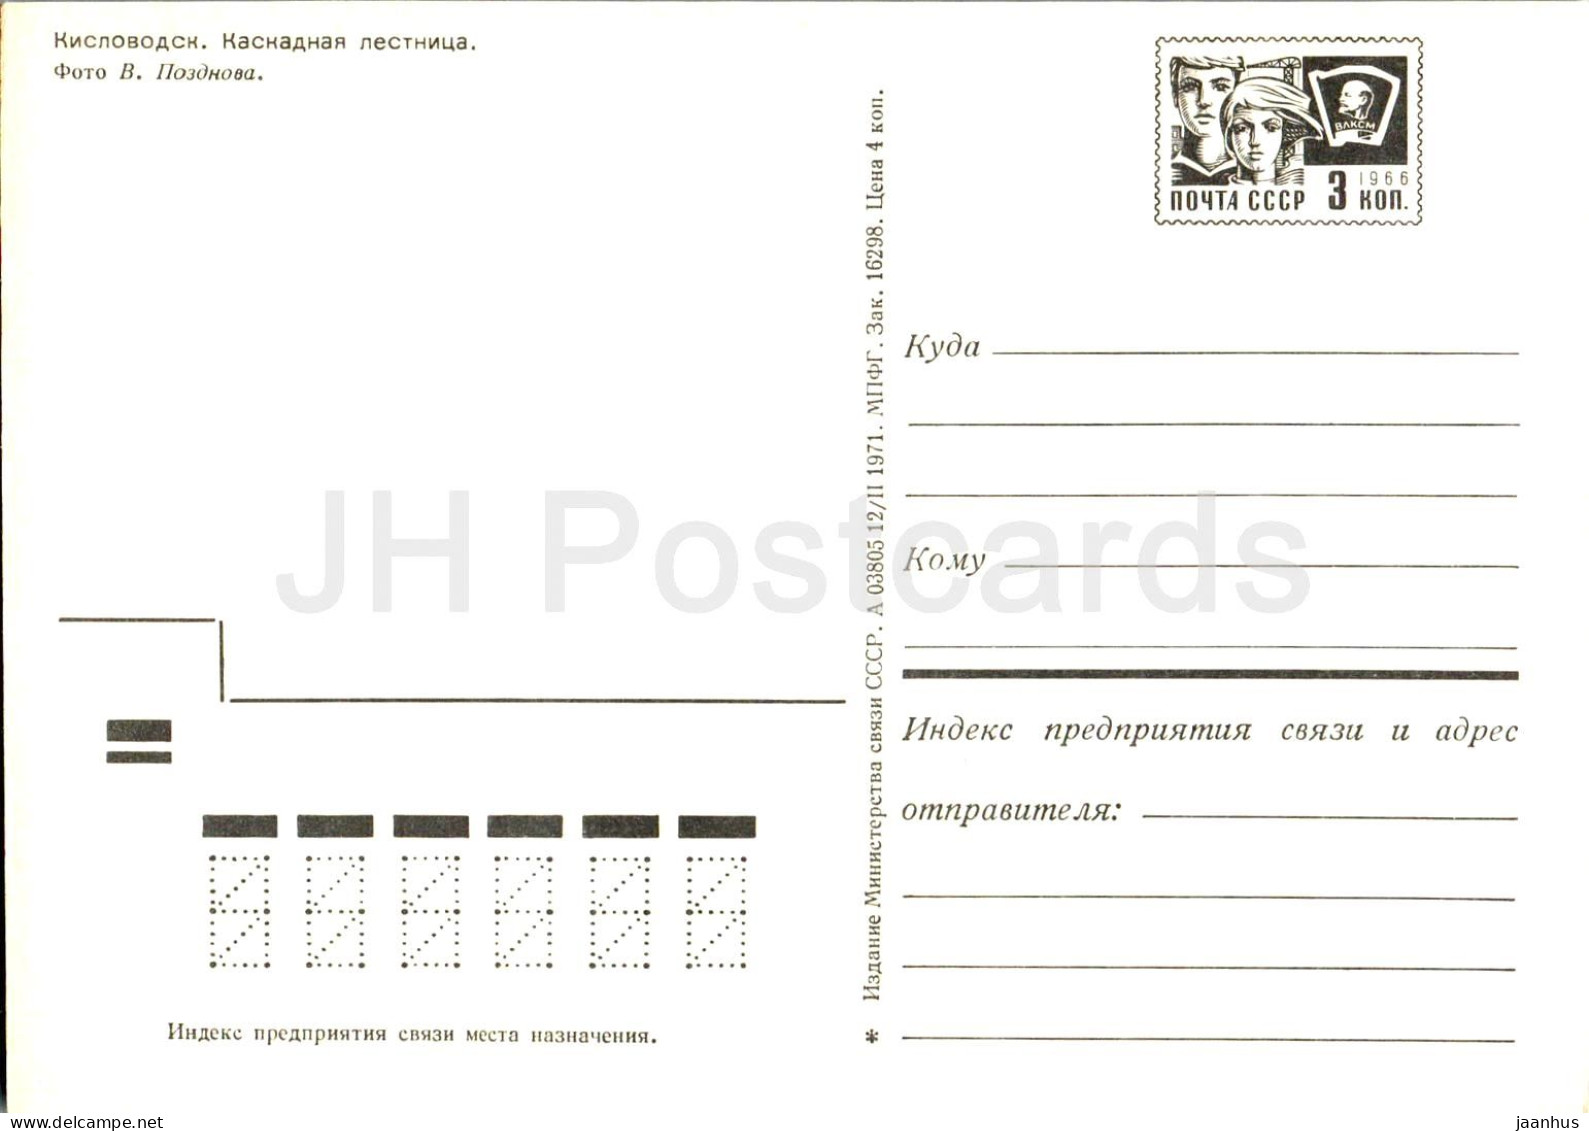 Kislovodsk - Cascading Staircase - Postal Stationery - 1971 - Russia USSR - Unused - Rusland